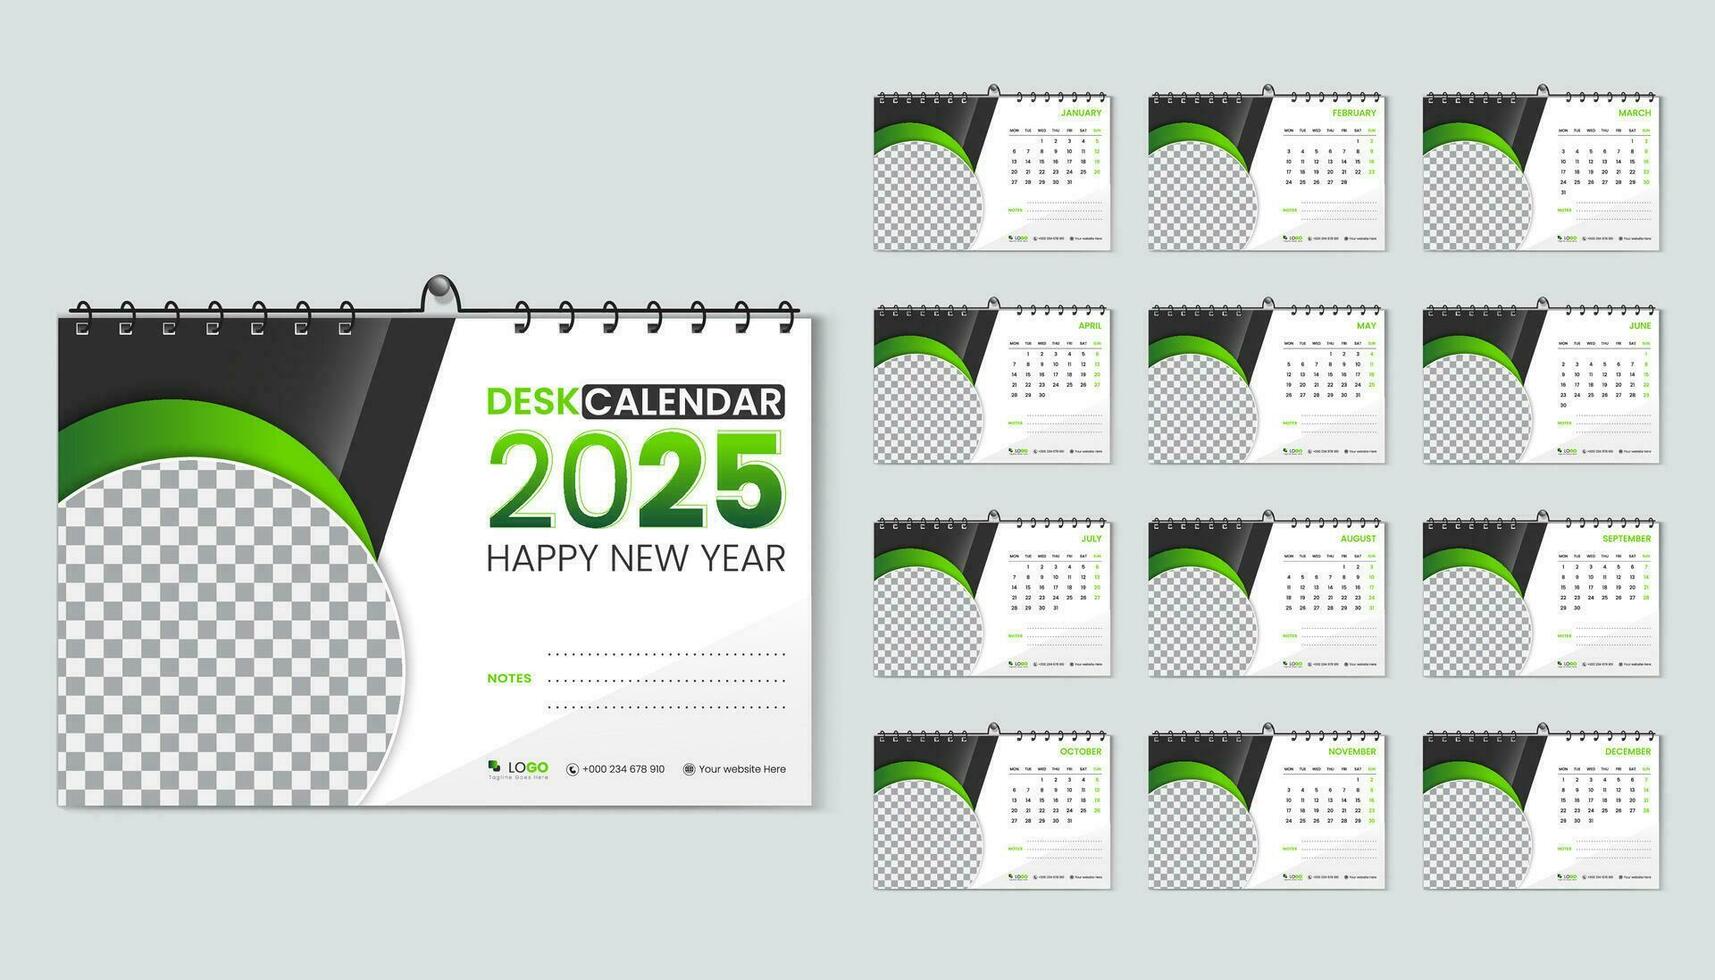 Desk calendar 2025 planner and corporate design template set, Annual calendar 2025 for 12 months, week starts Monday, abstract green gradient color shape with vector layout